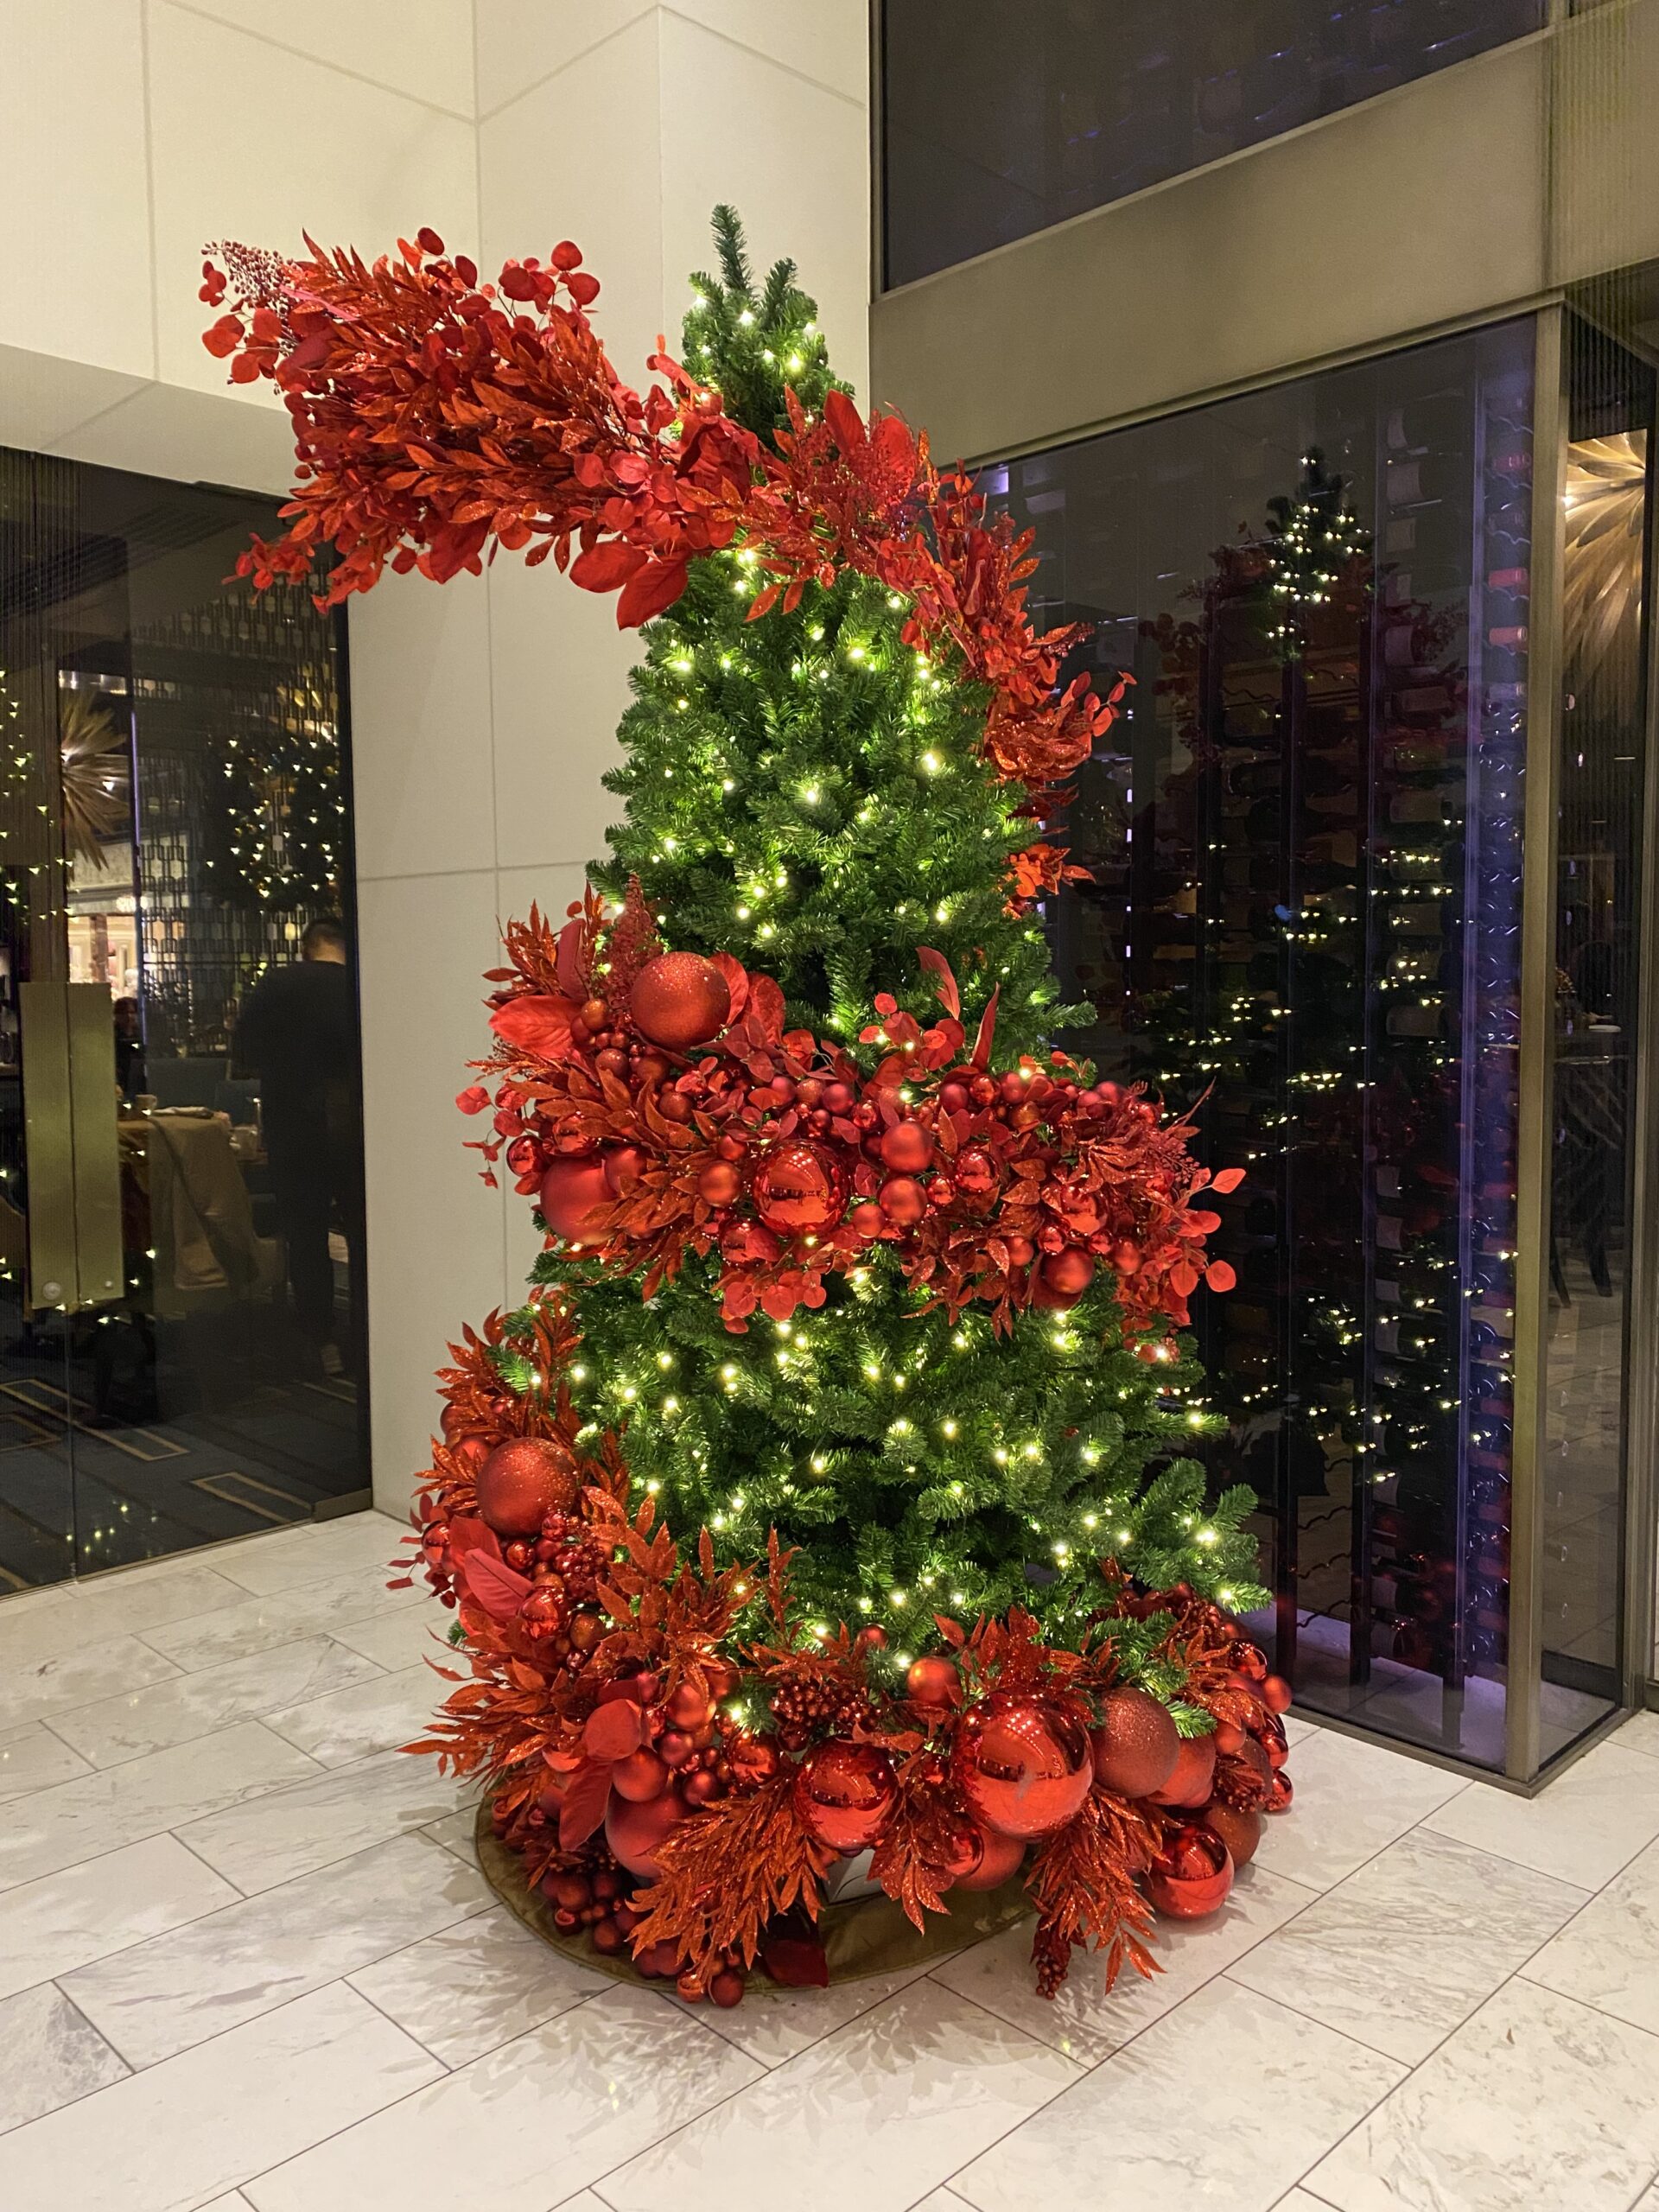 A tree decorated for Christmas